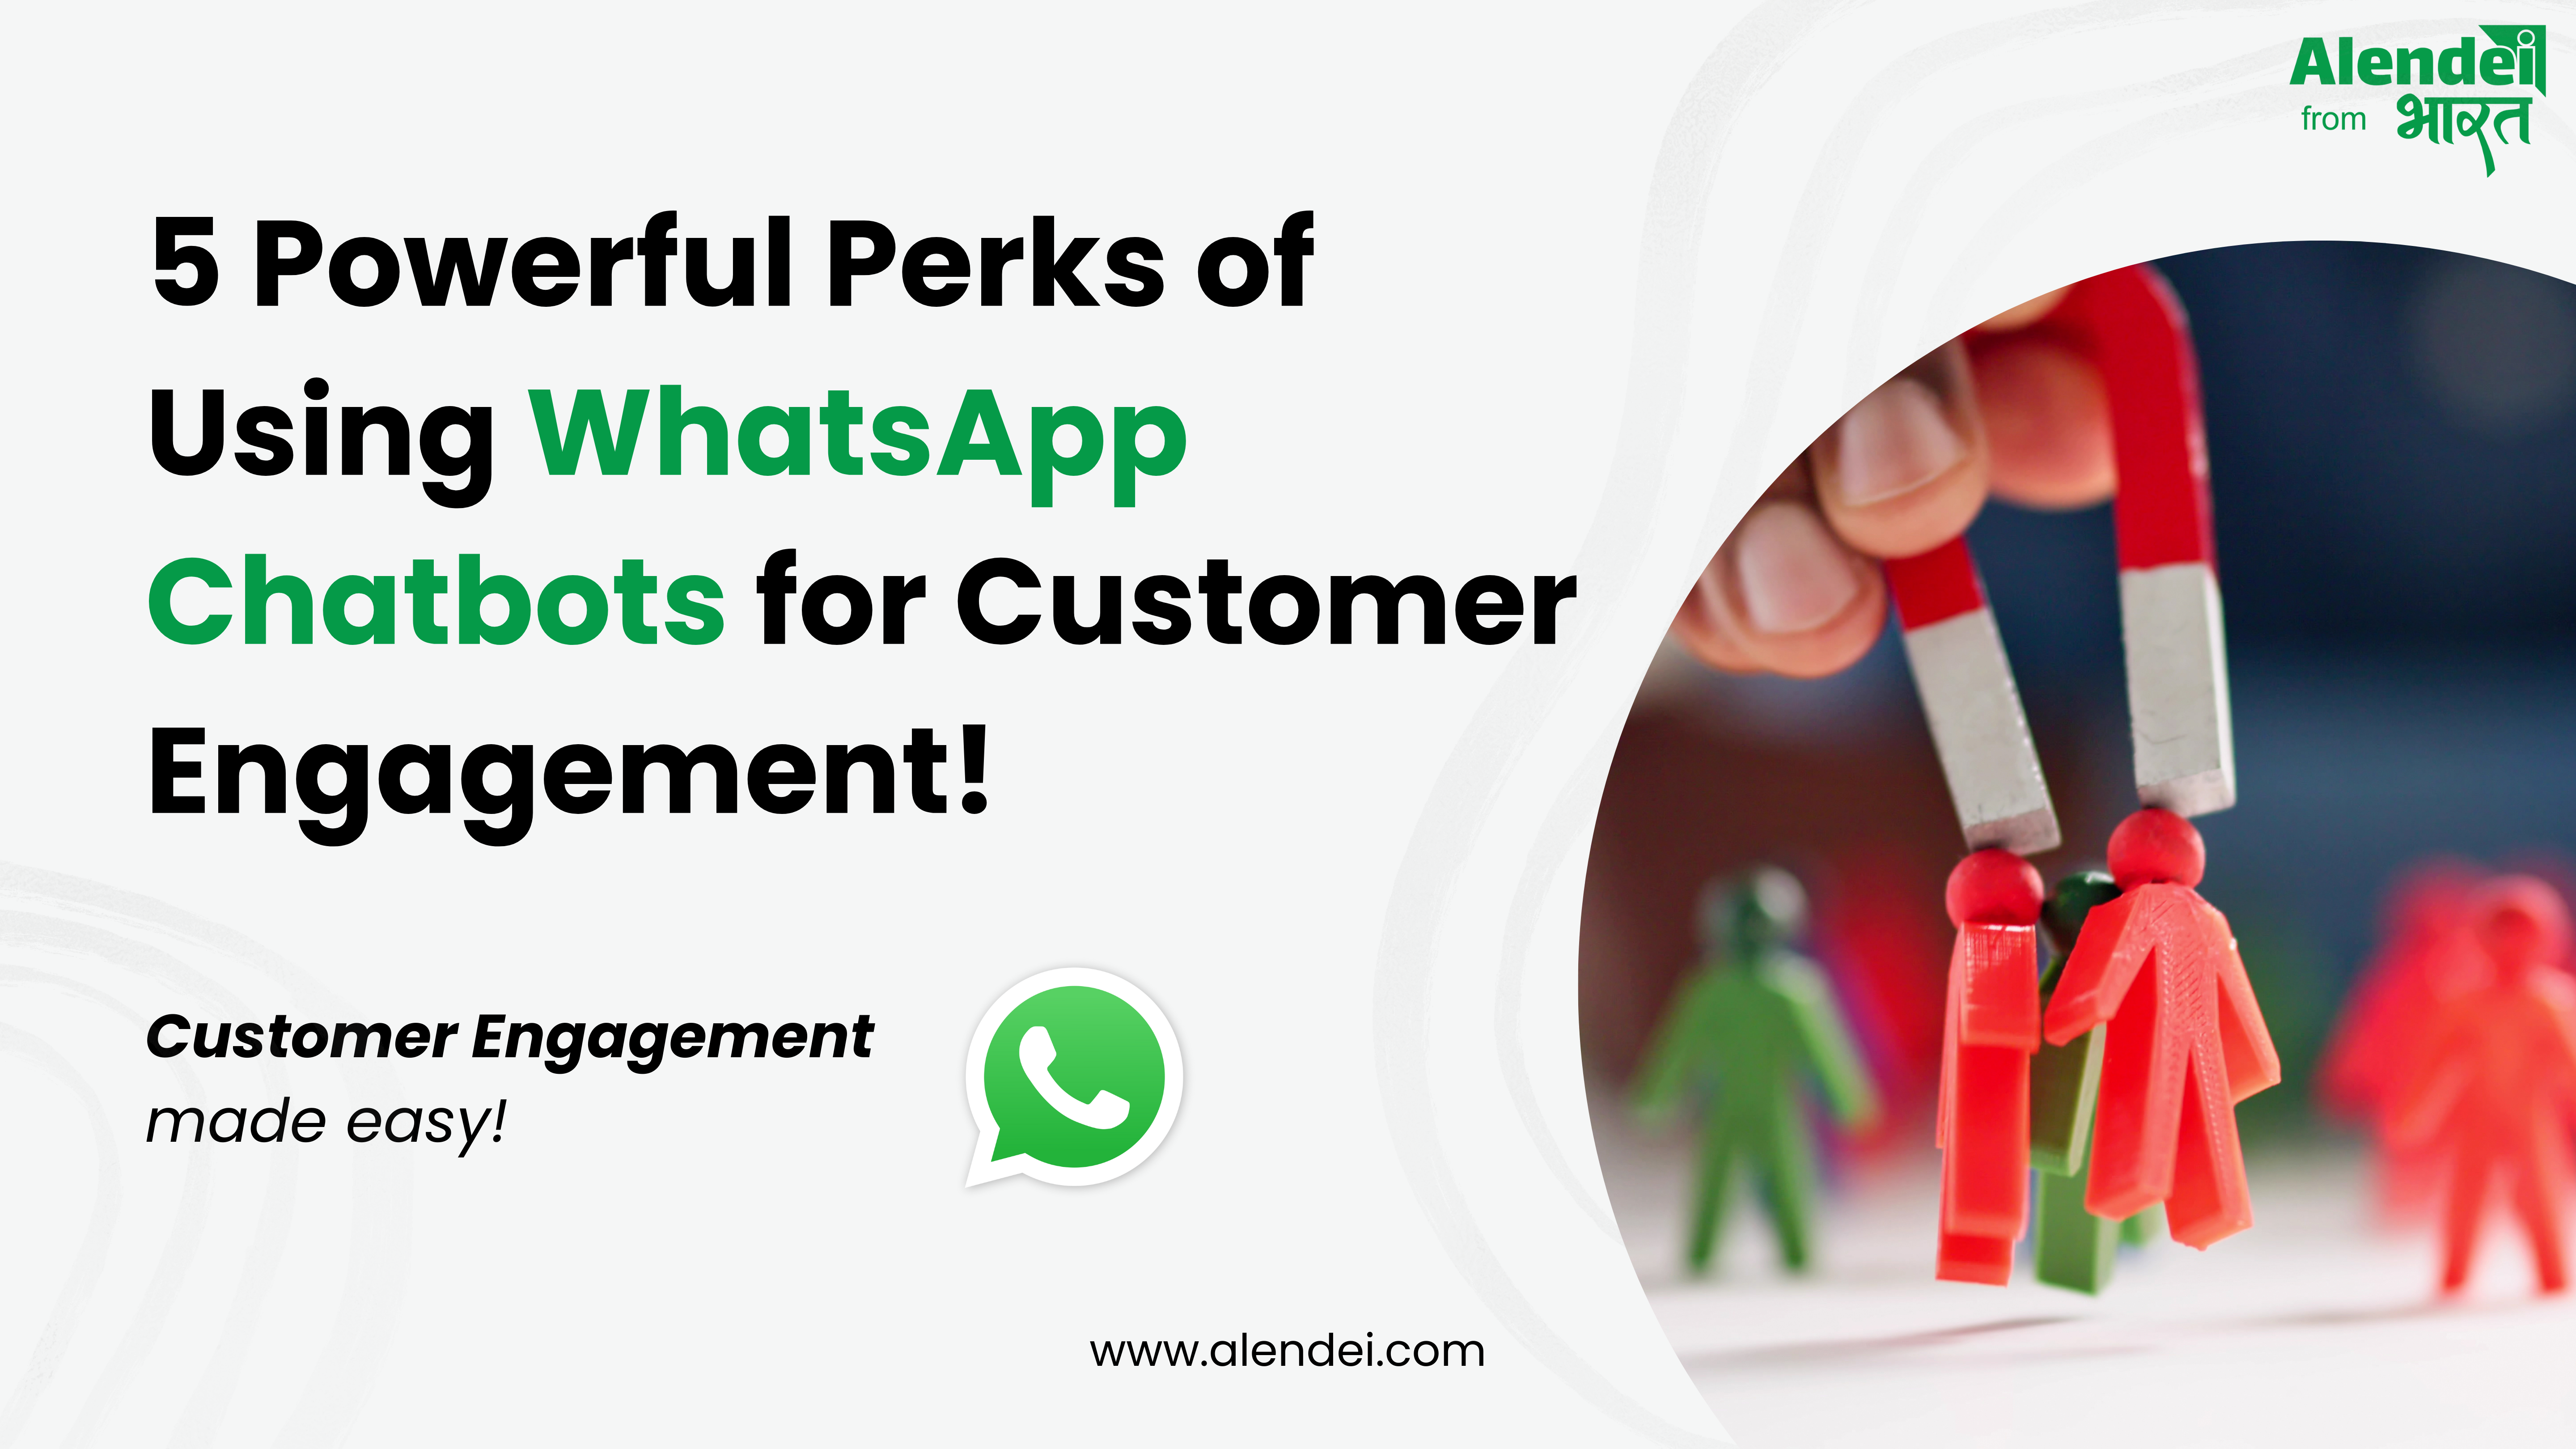 5 Powerful Perks of Using WhatsApp Chatbots for Customer Engagement!